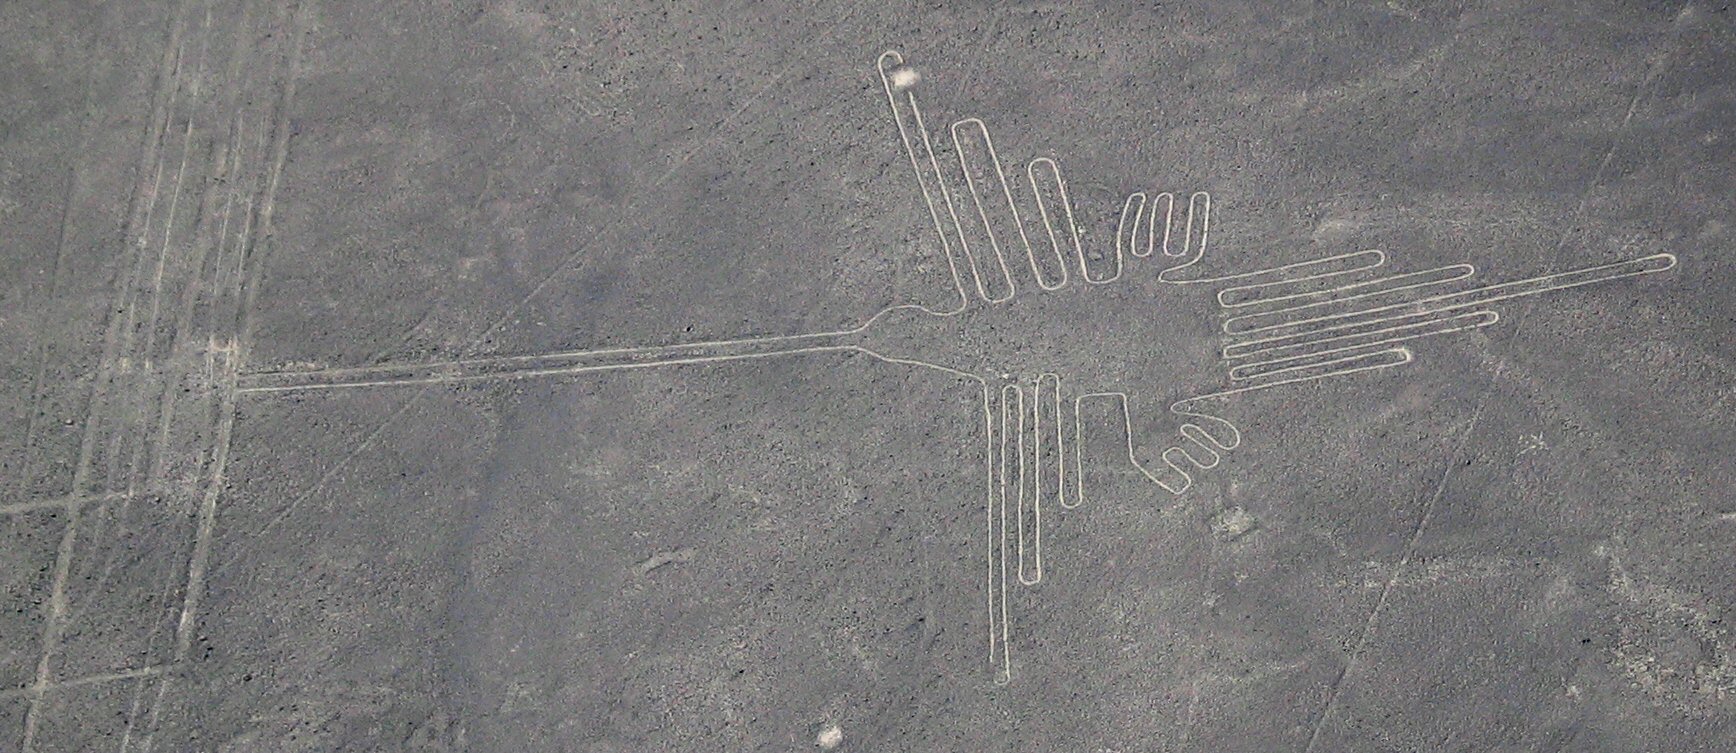 The Nazca Lines of Ancient Peru: Dr. Maria Reiche and a Life's